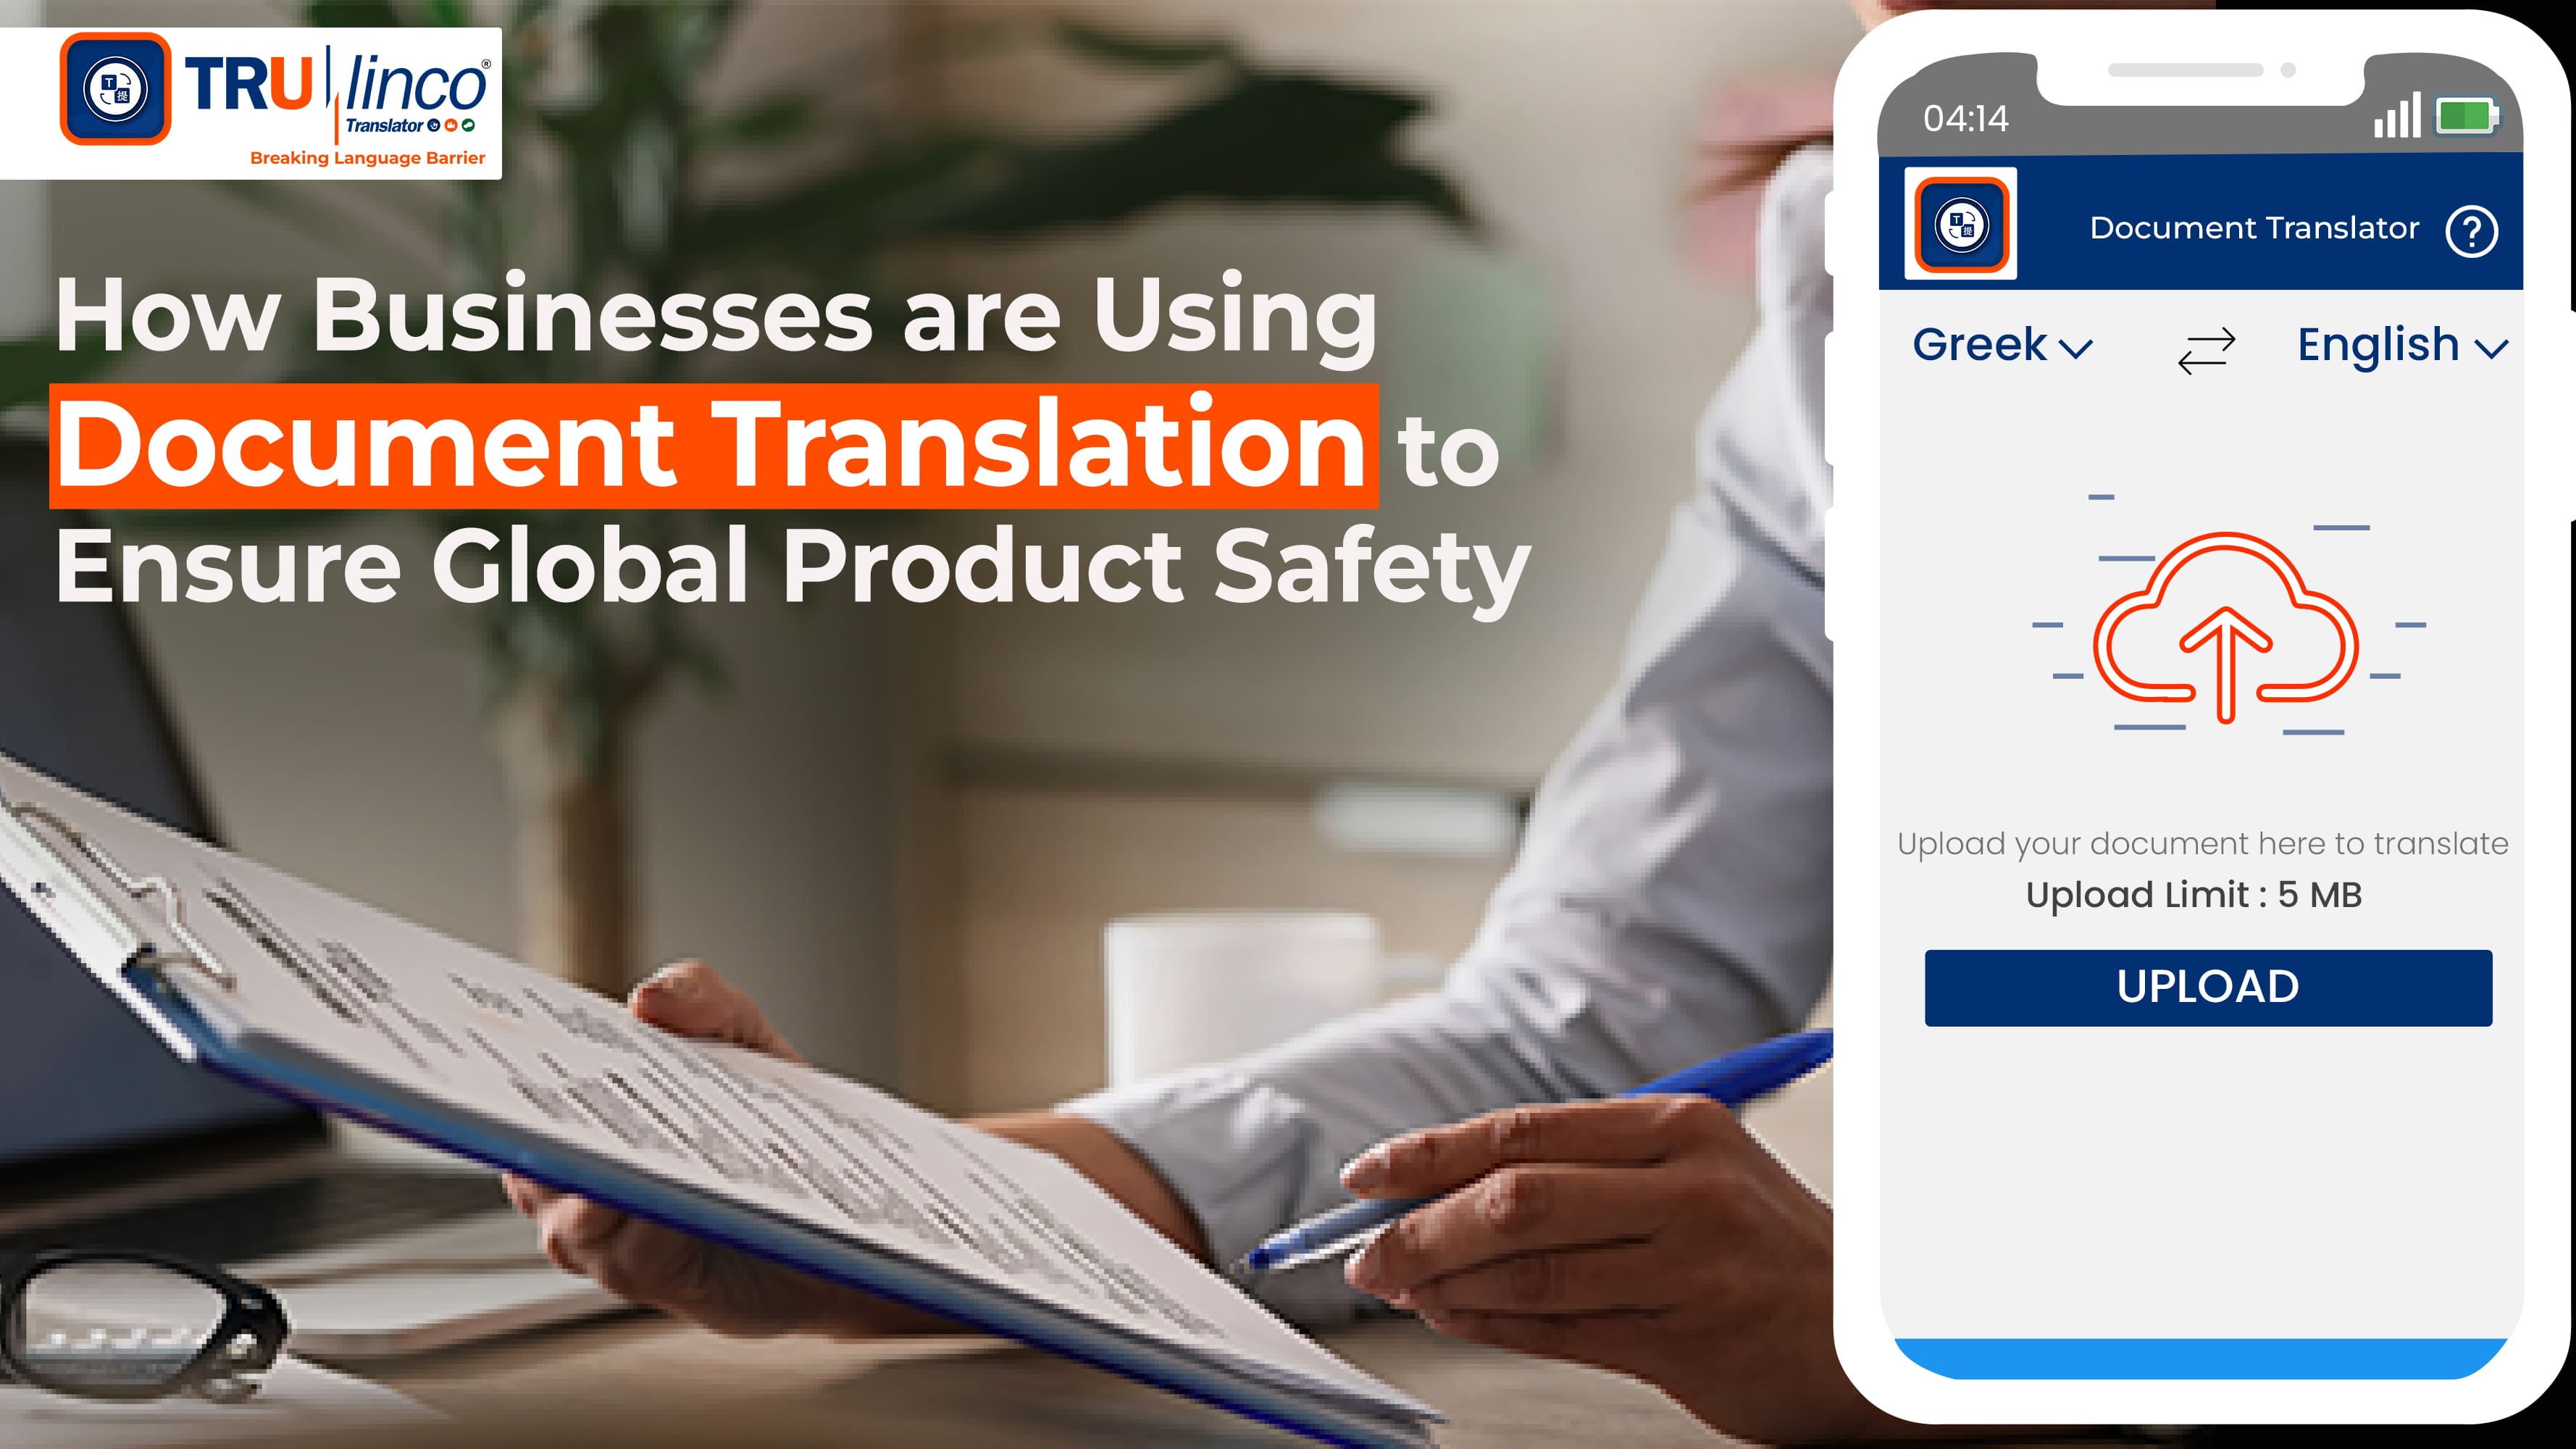 How Businesses are Using Document Translation to Ensure Global Product Safety